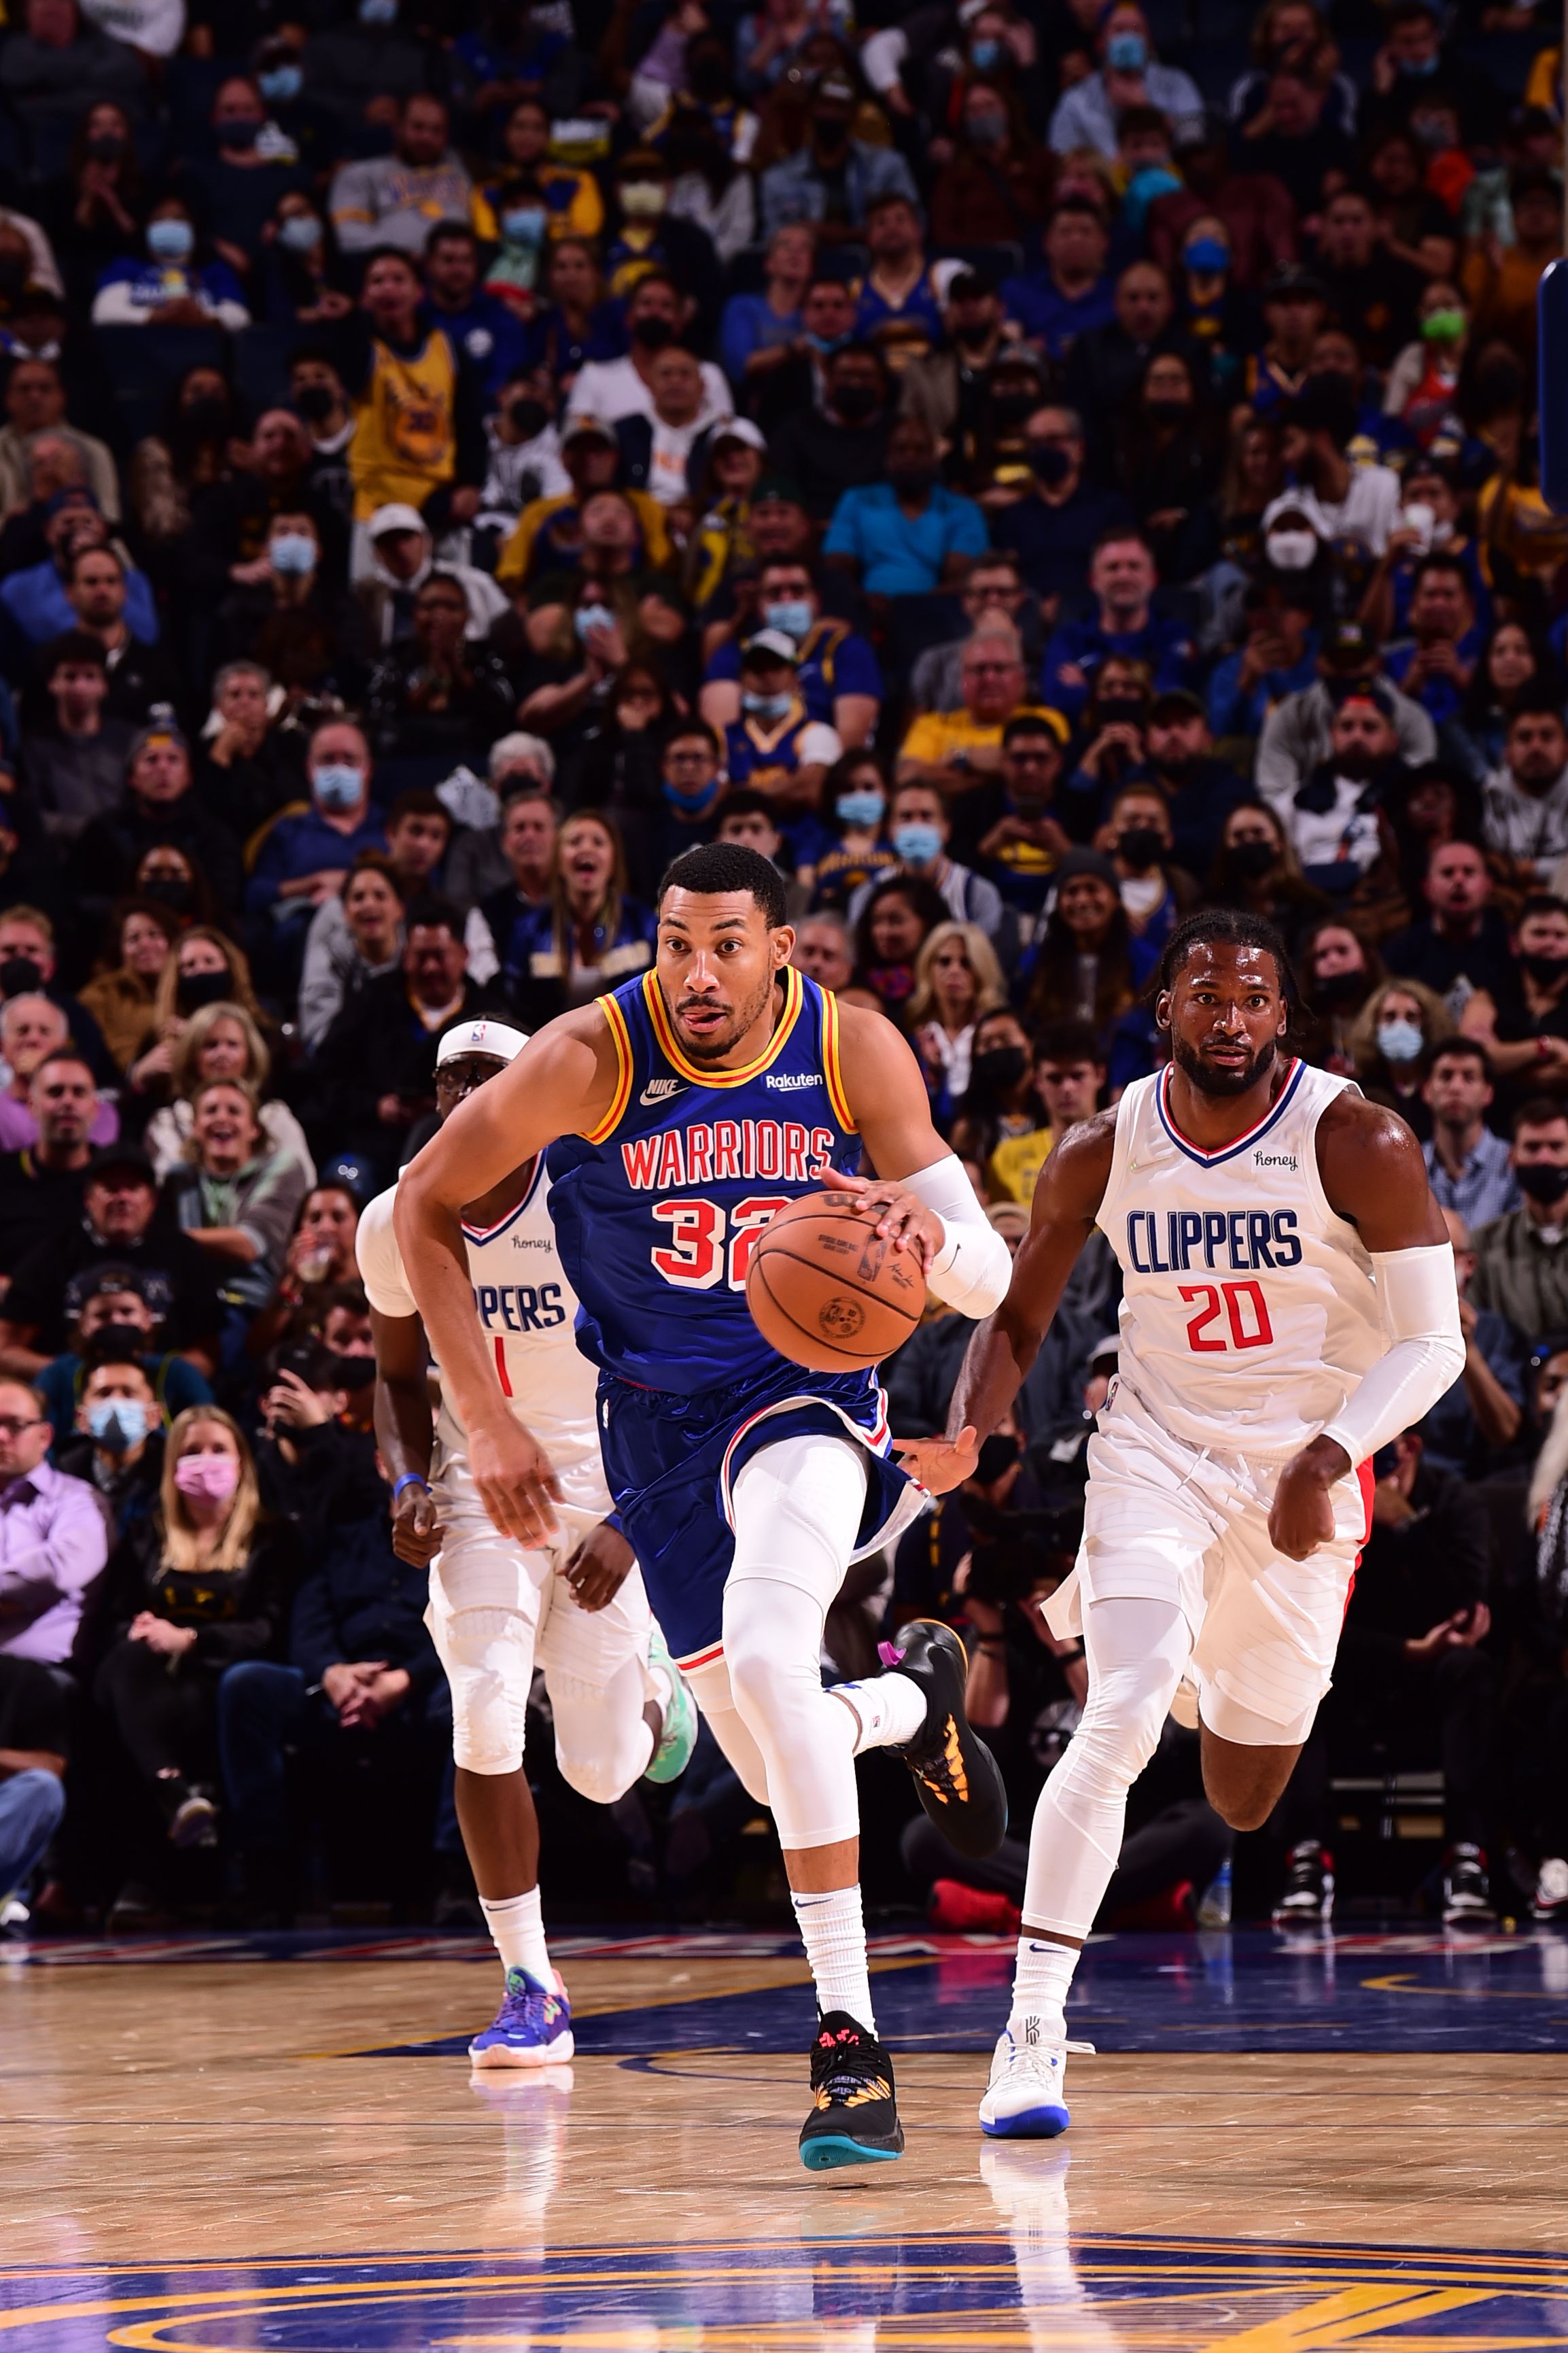 Otto Porter Jr. during the game against the LA Clippers on October 21, 2021 at Chase Center in San Francisco, California | Source: Getty Images